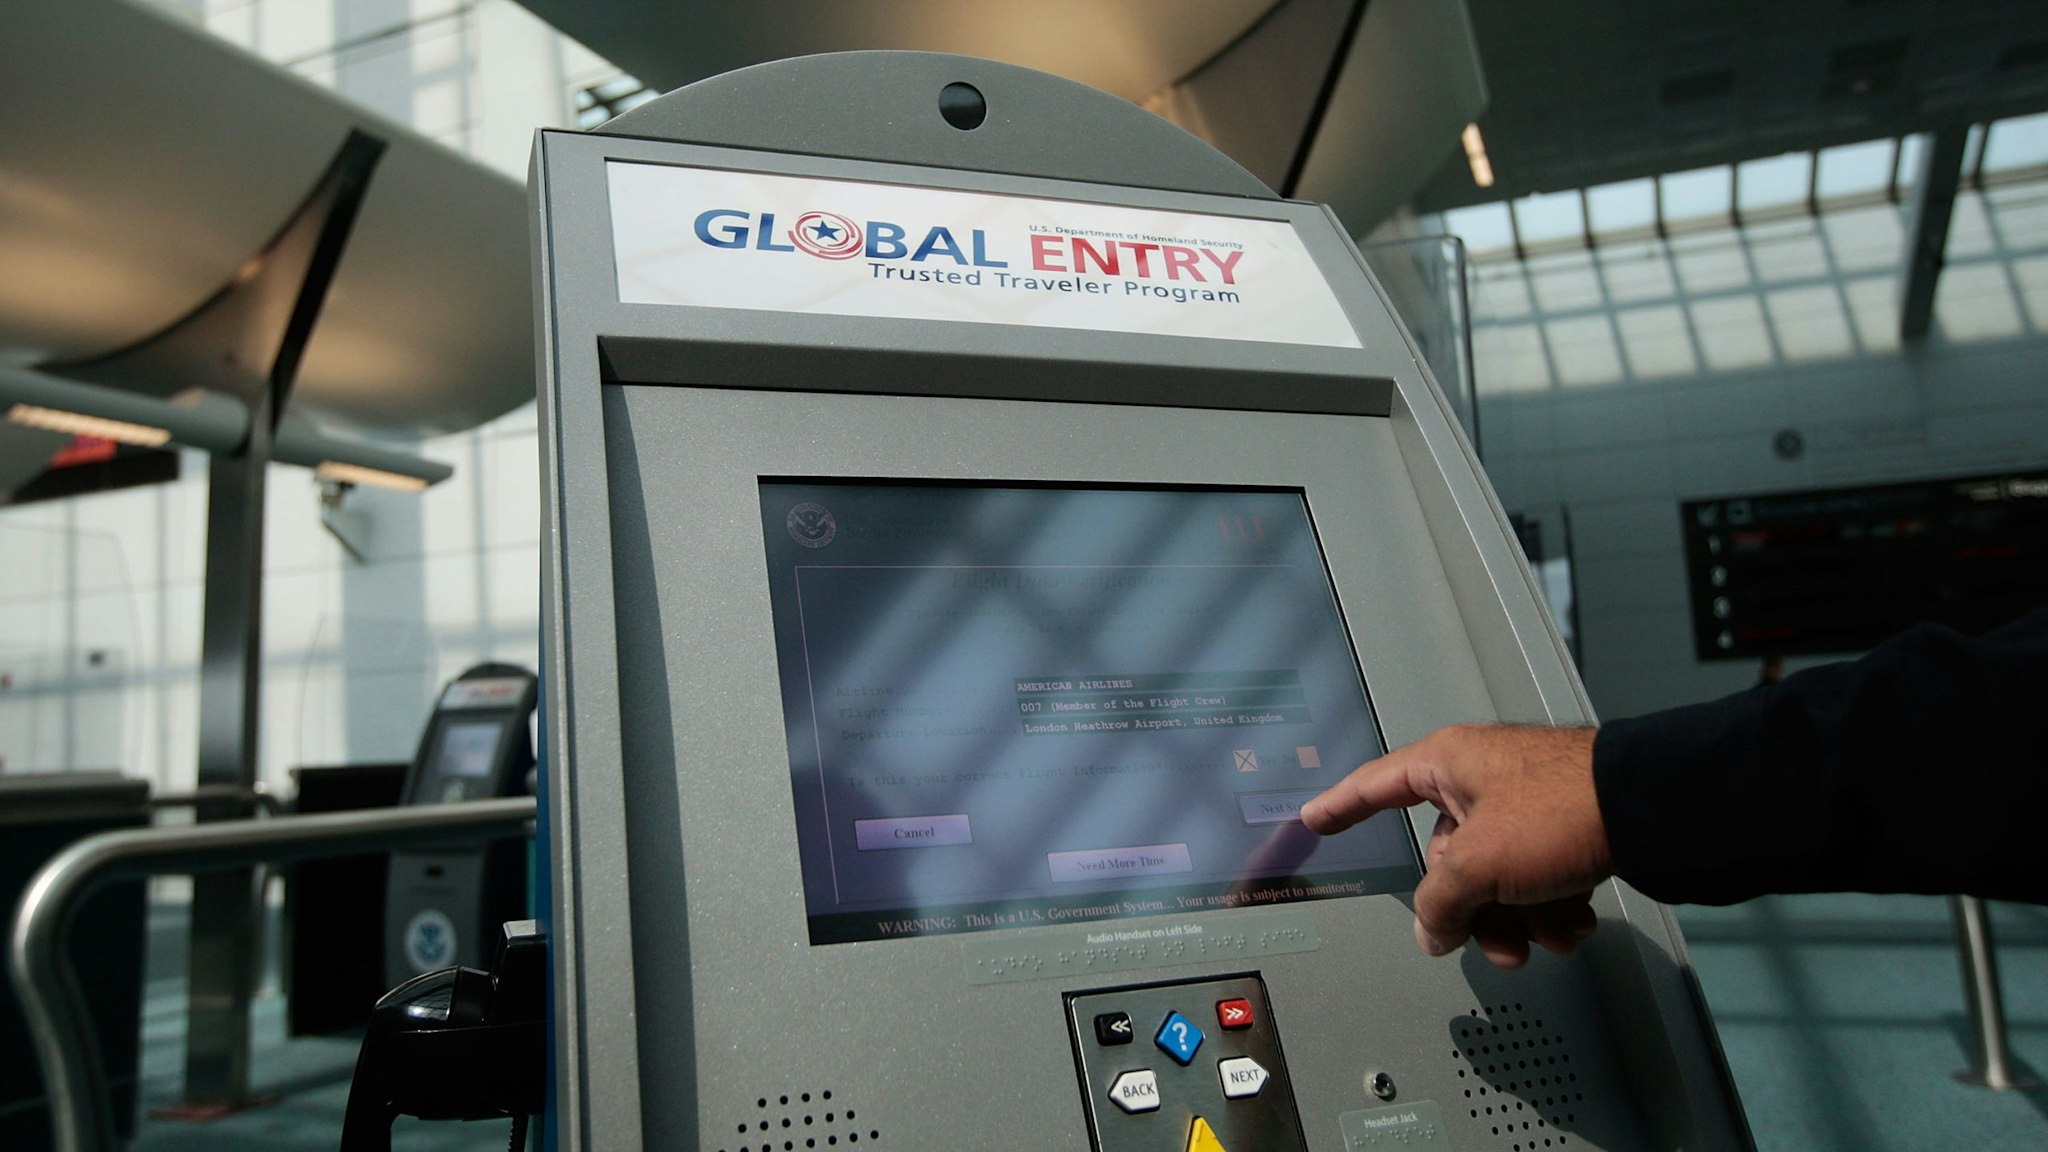 EWARK, NJ - AUGUST 24: An officer with the US Customs and Border Protection demonstrates a new arrivals processing kiosk at Newark International Airport August 24, 2009 in Newark, New Jersey. Officials with U.S. Customs and Border Protection are introducing are introducing the Global Entry program, which allows pre-screening and approval of travelers and faster trips through customs and passport lines upon arriving into the United States. (Photo by Chris Hondros/Getty Images)